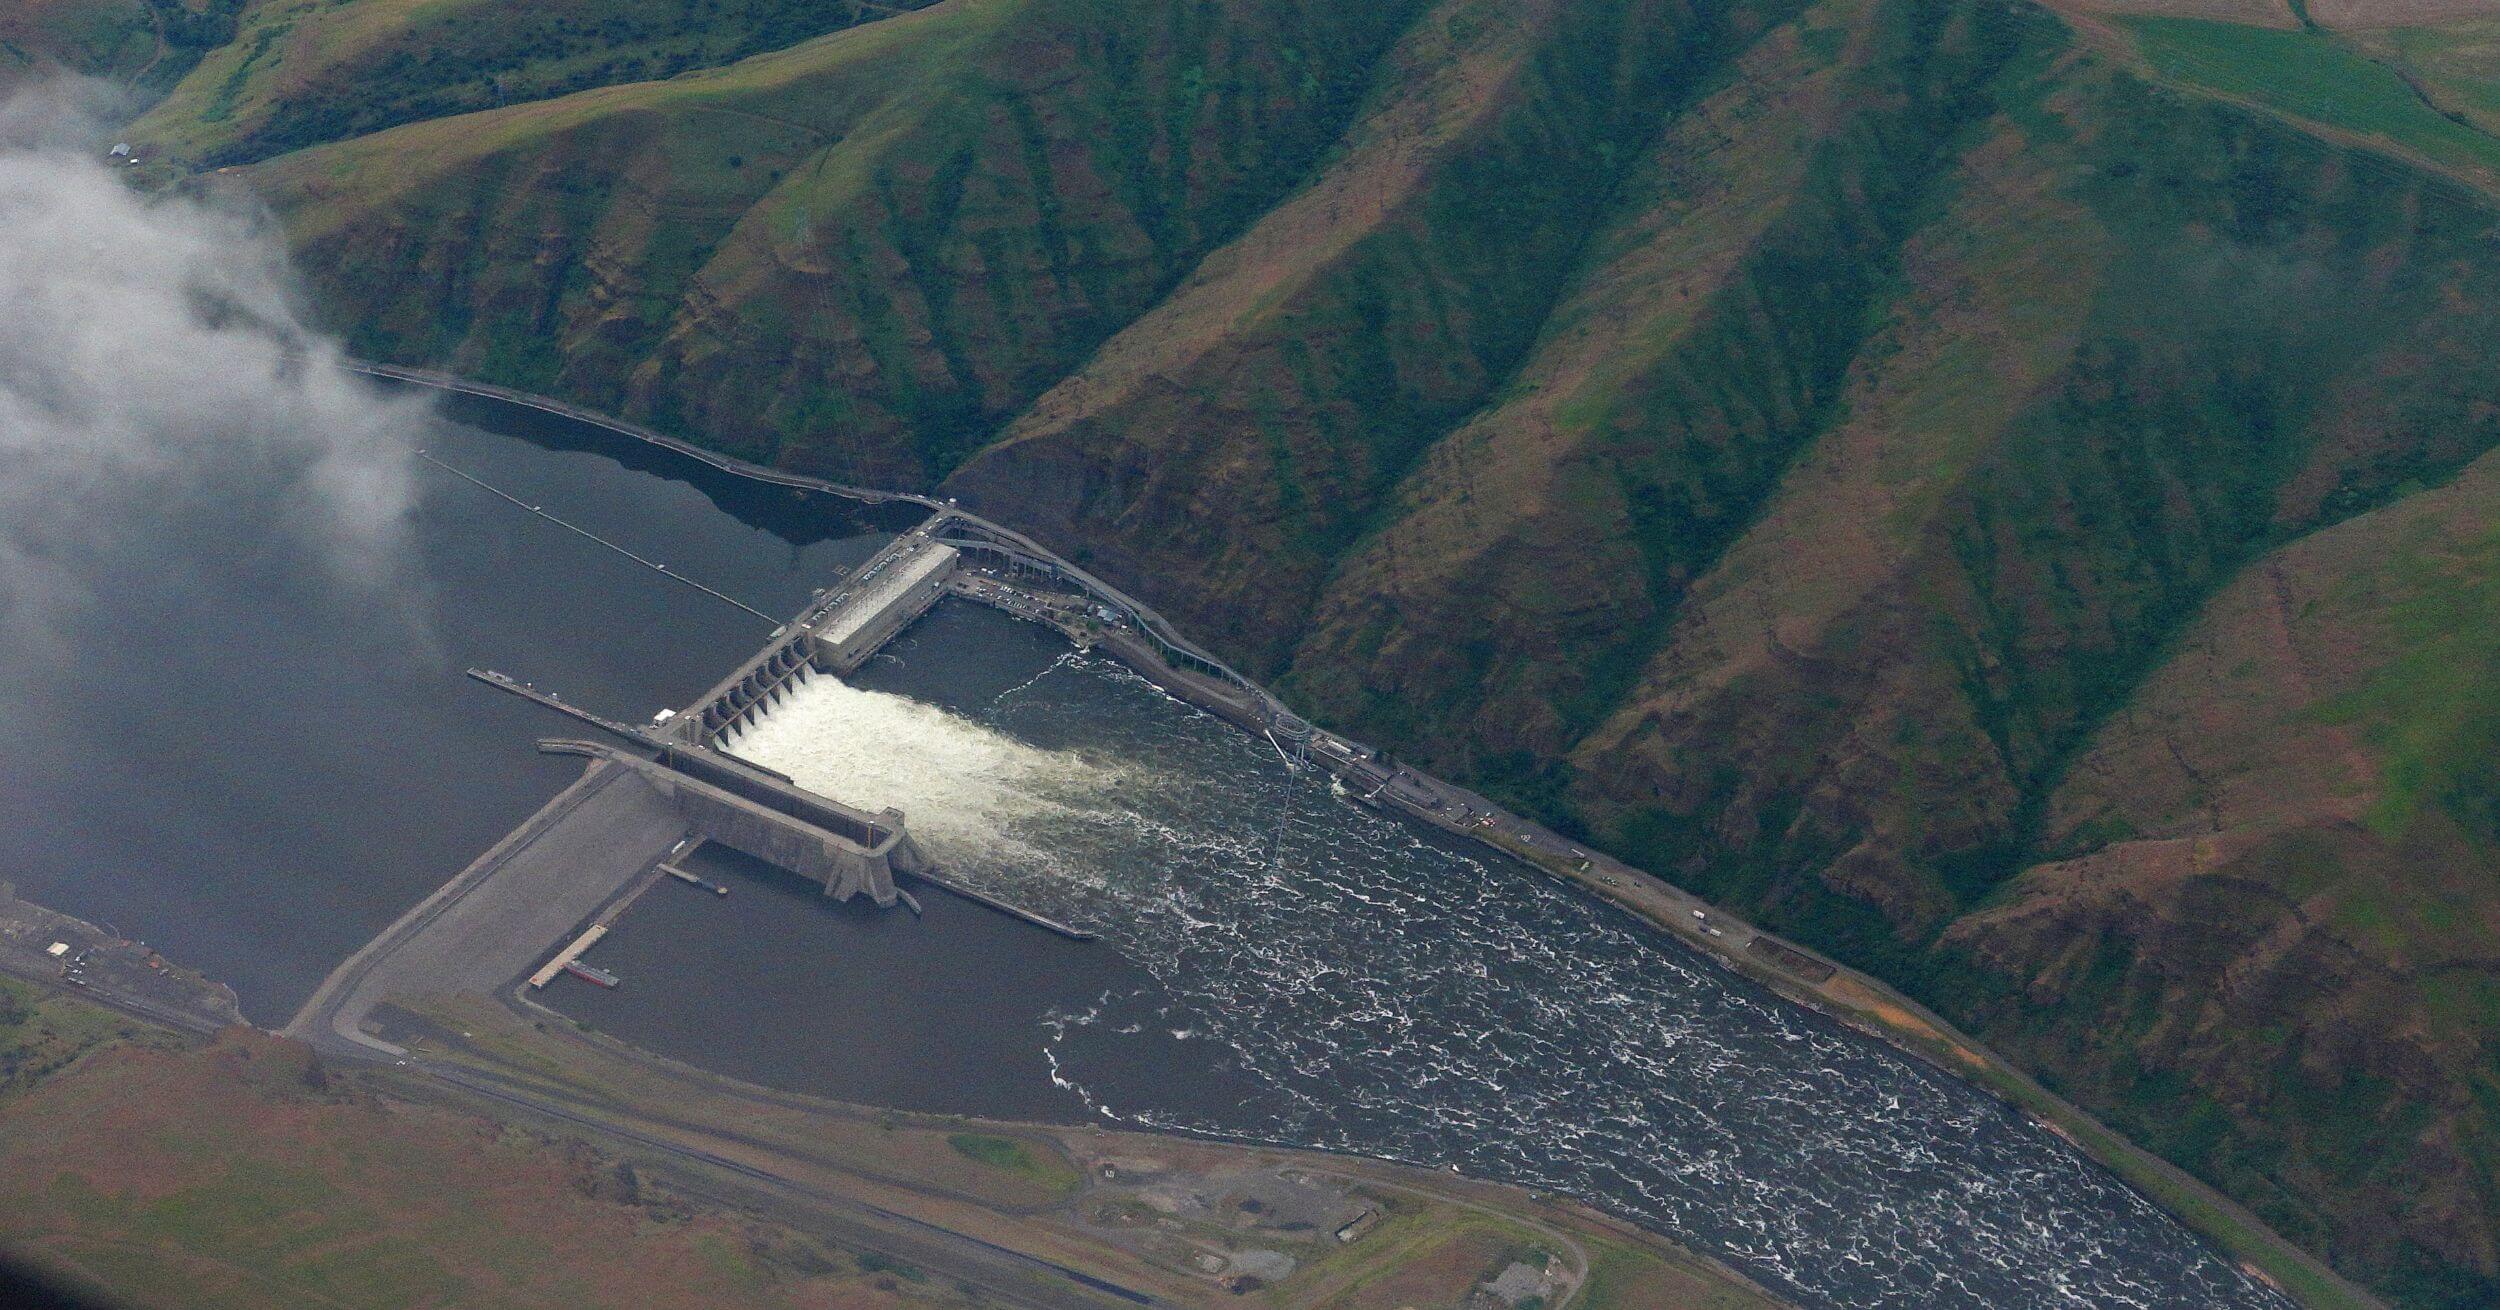 Snake River dams breach ‘not an option right now,’ but salmon fix needed in future, say Murray, Inslee